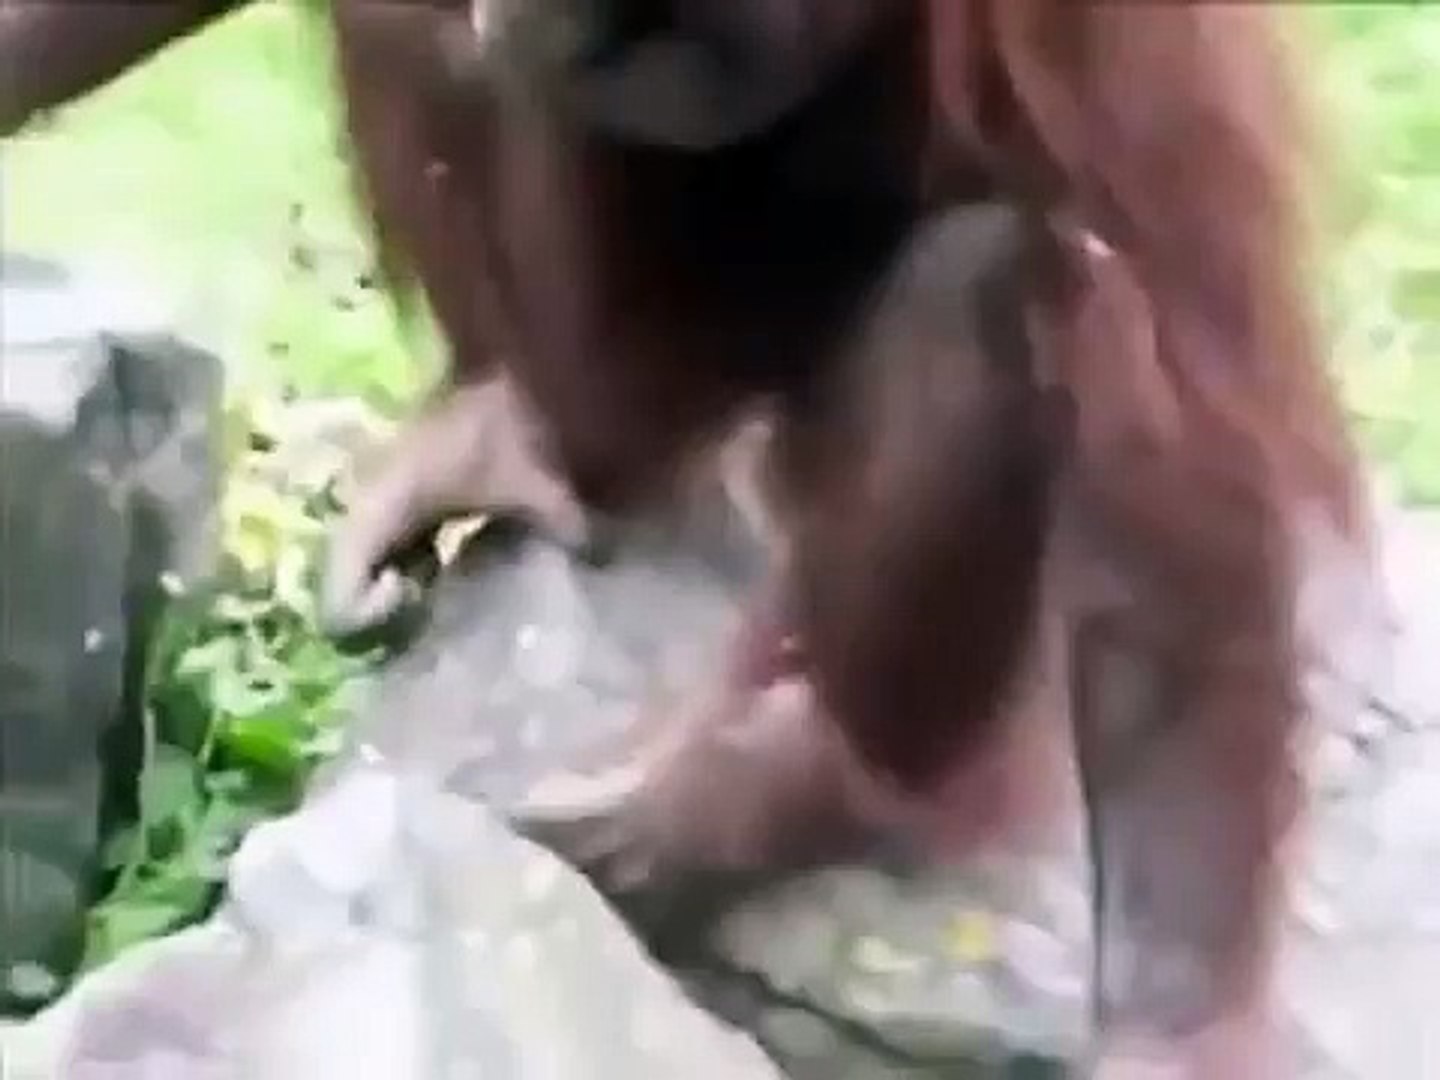 Orangutan saves chick from drowning - YouTube